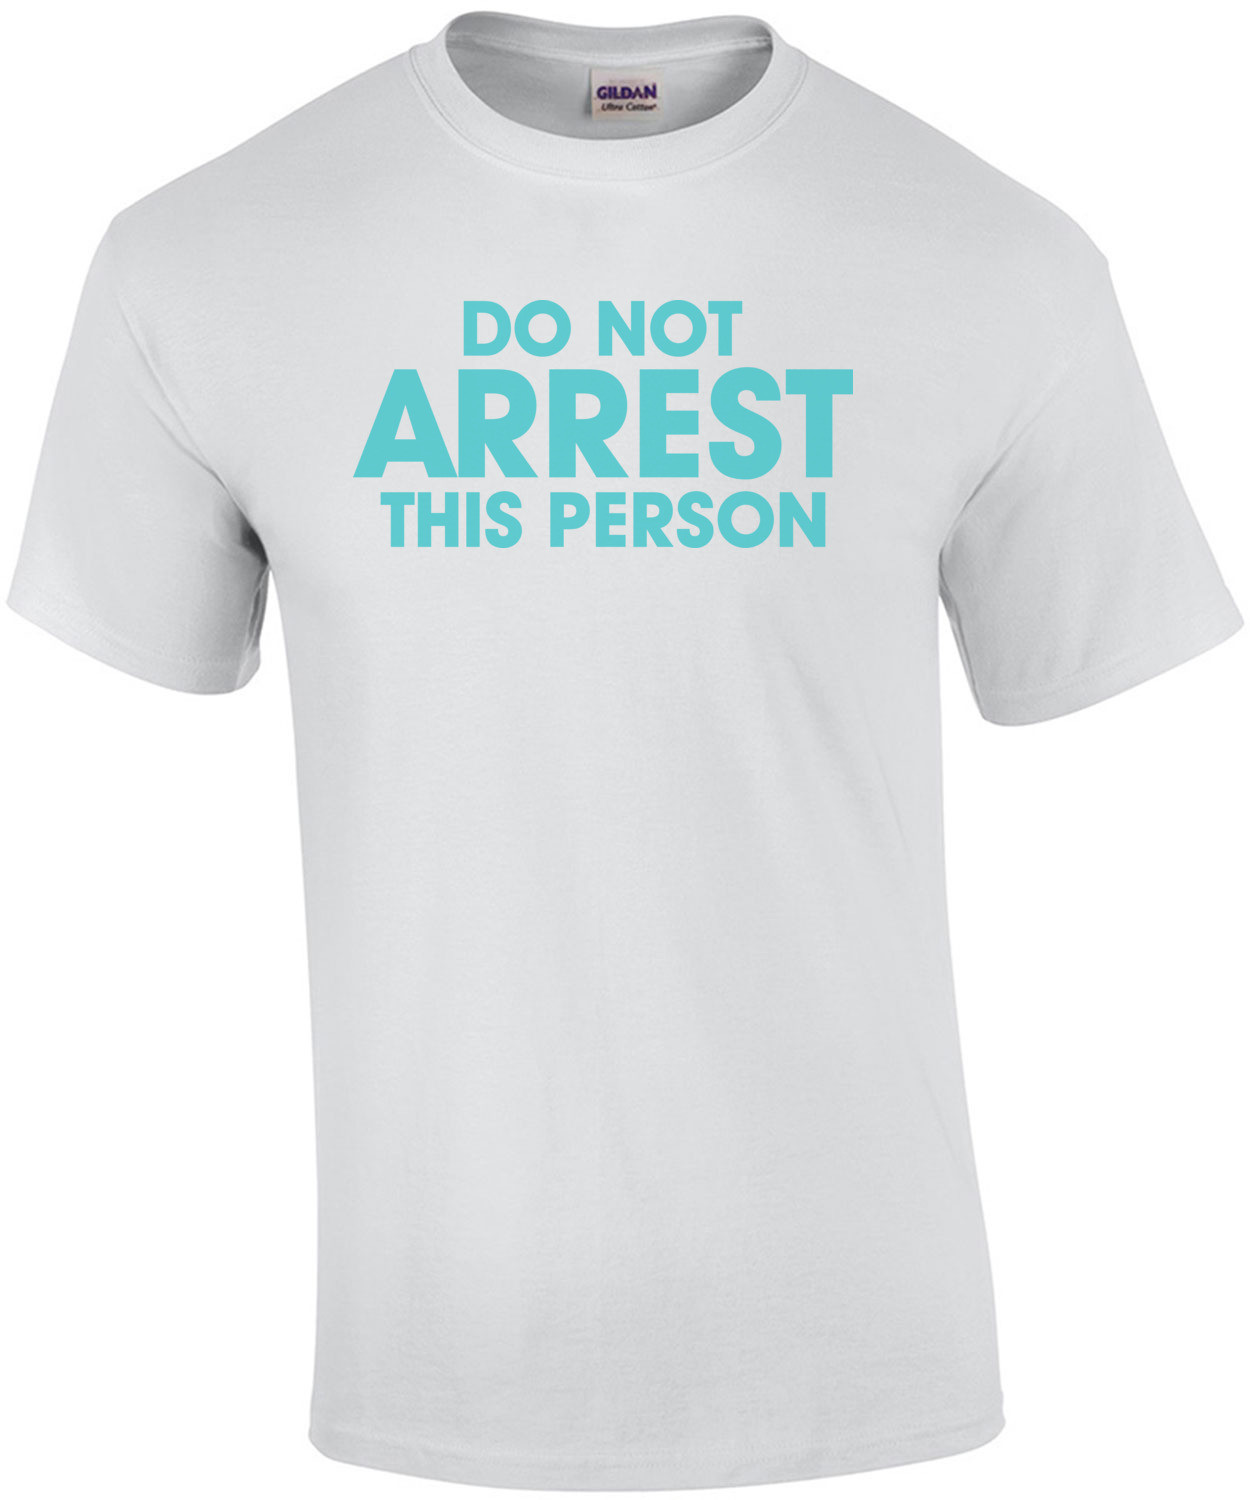 Do Not Arrest This Person T-shirt 